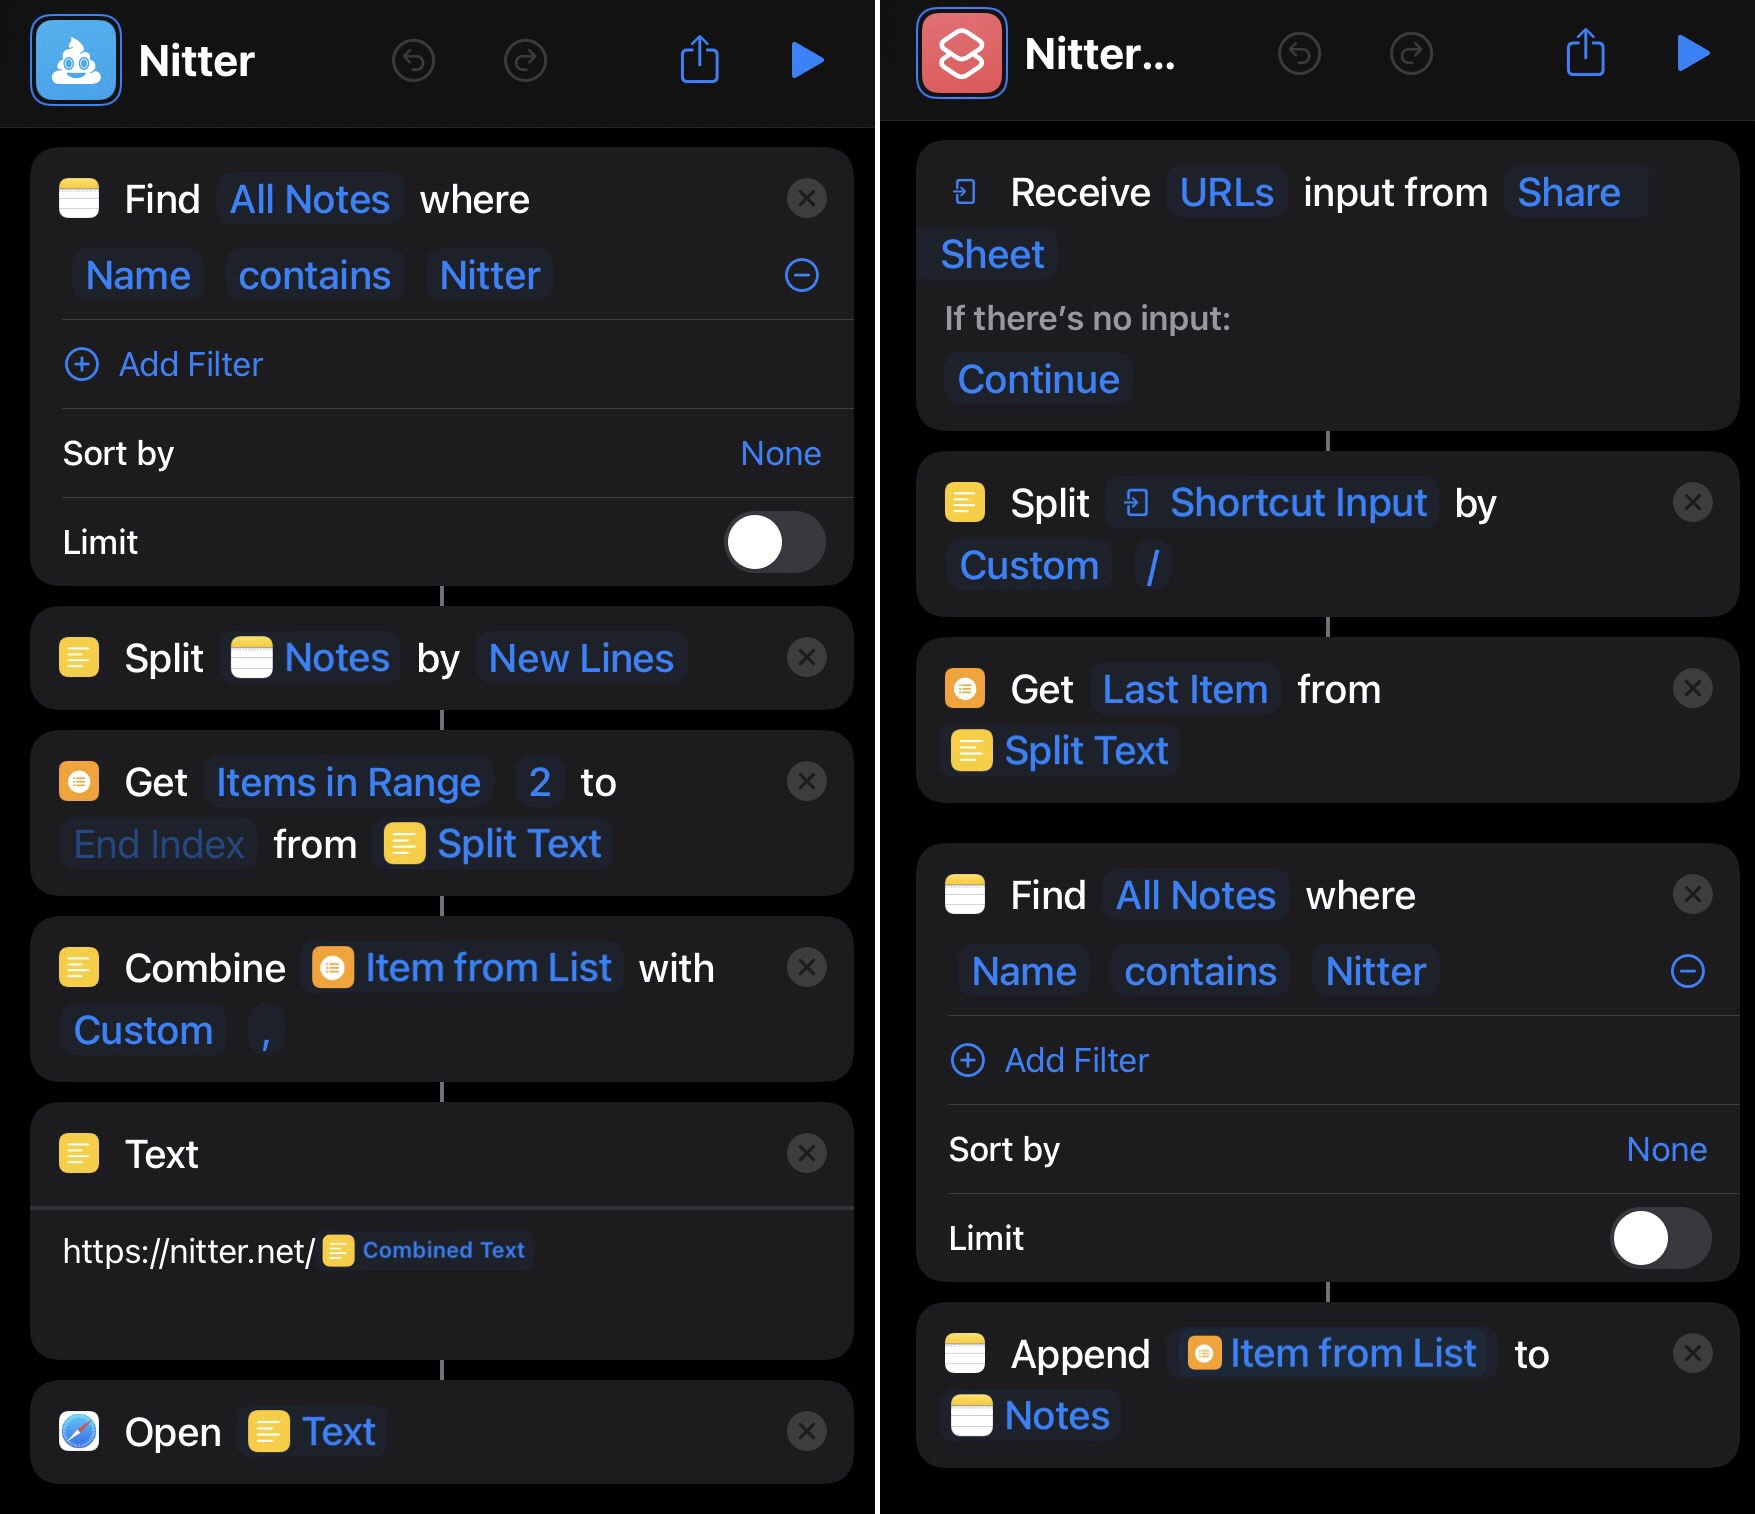 Figure 1: Screenshot showing the Siri Shortcuts described in this blog post